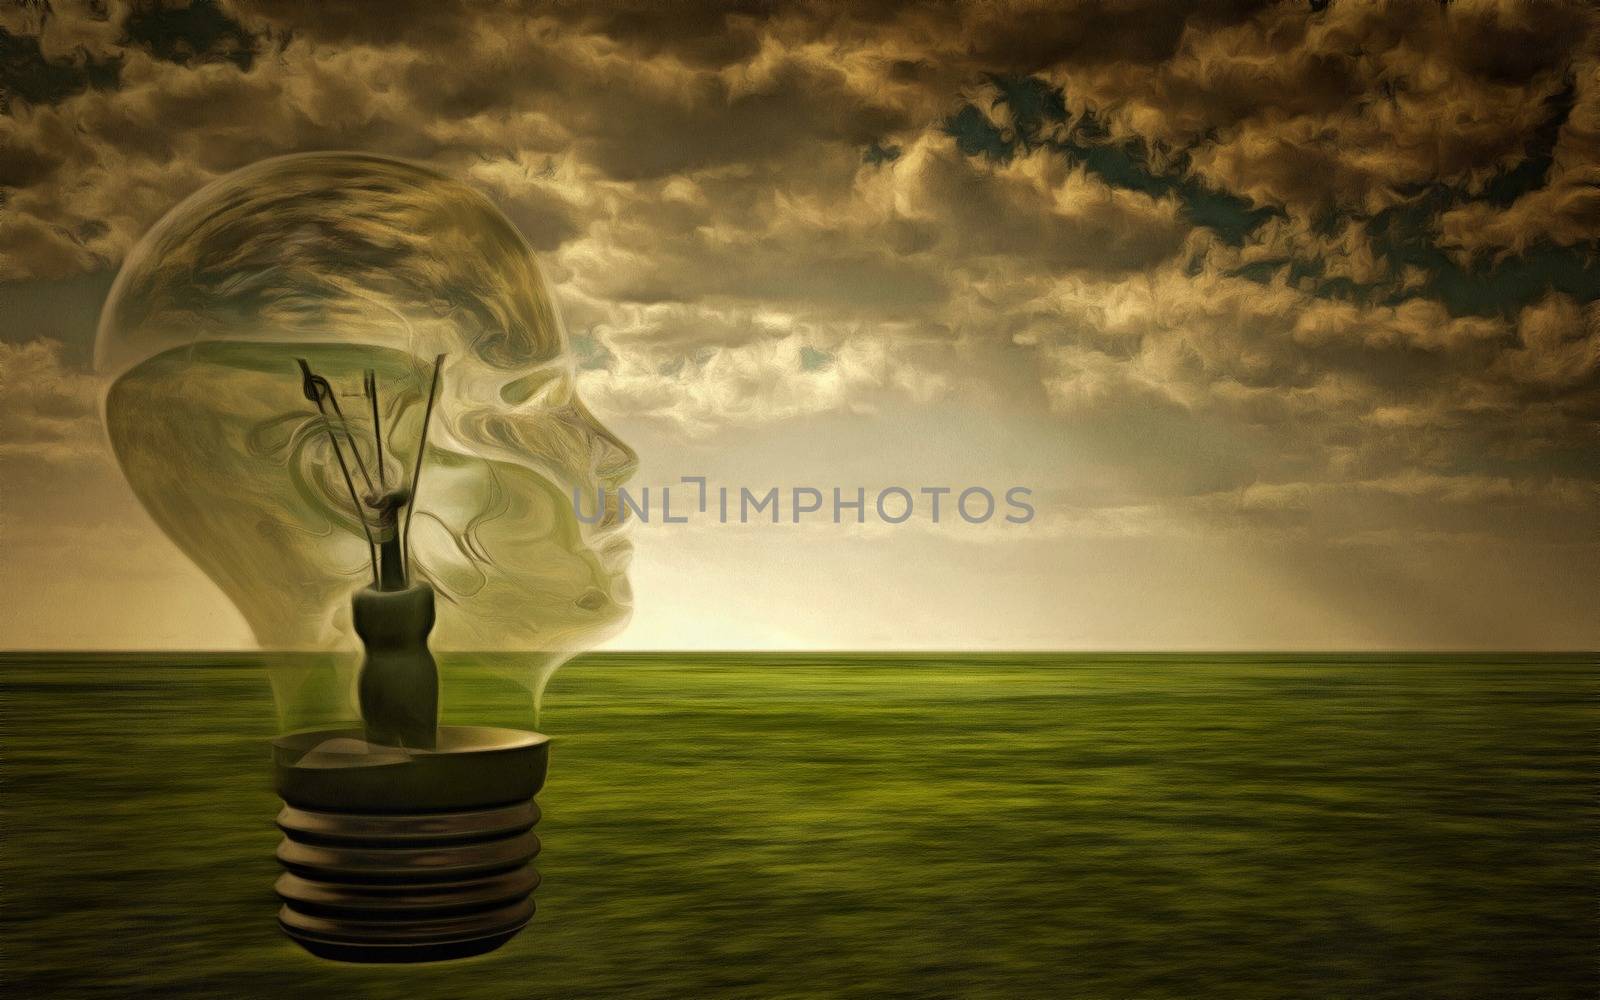 Surreal painting. Light bulb on a field.